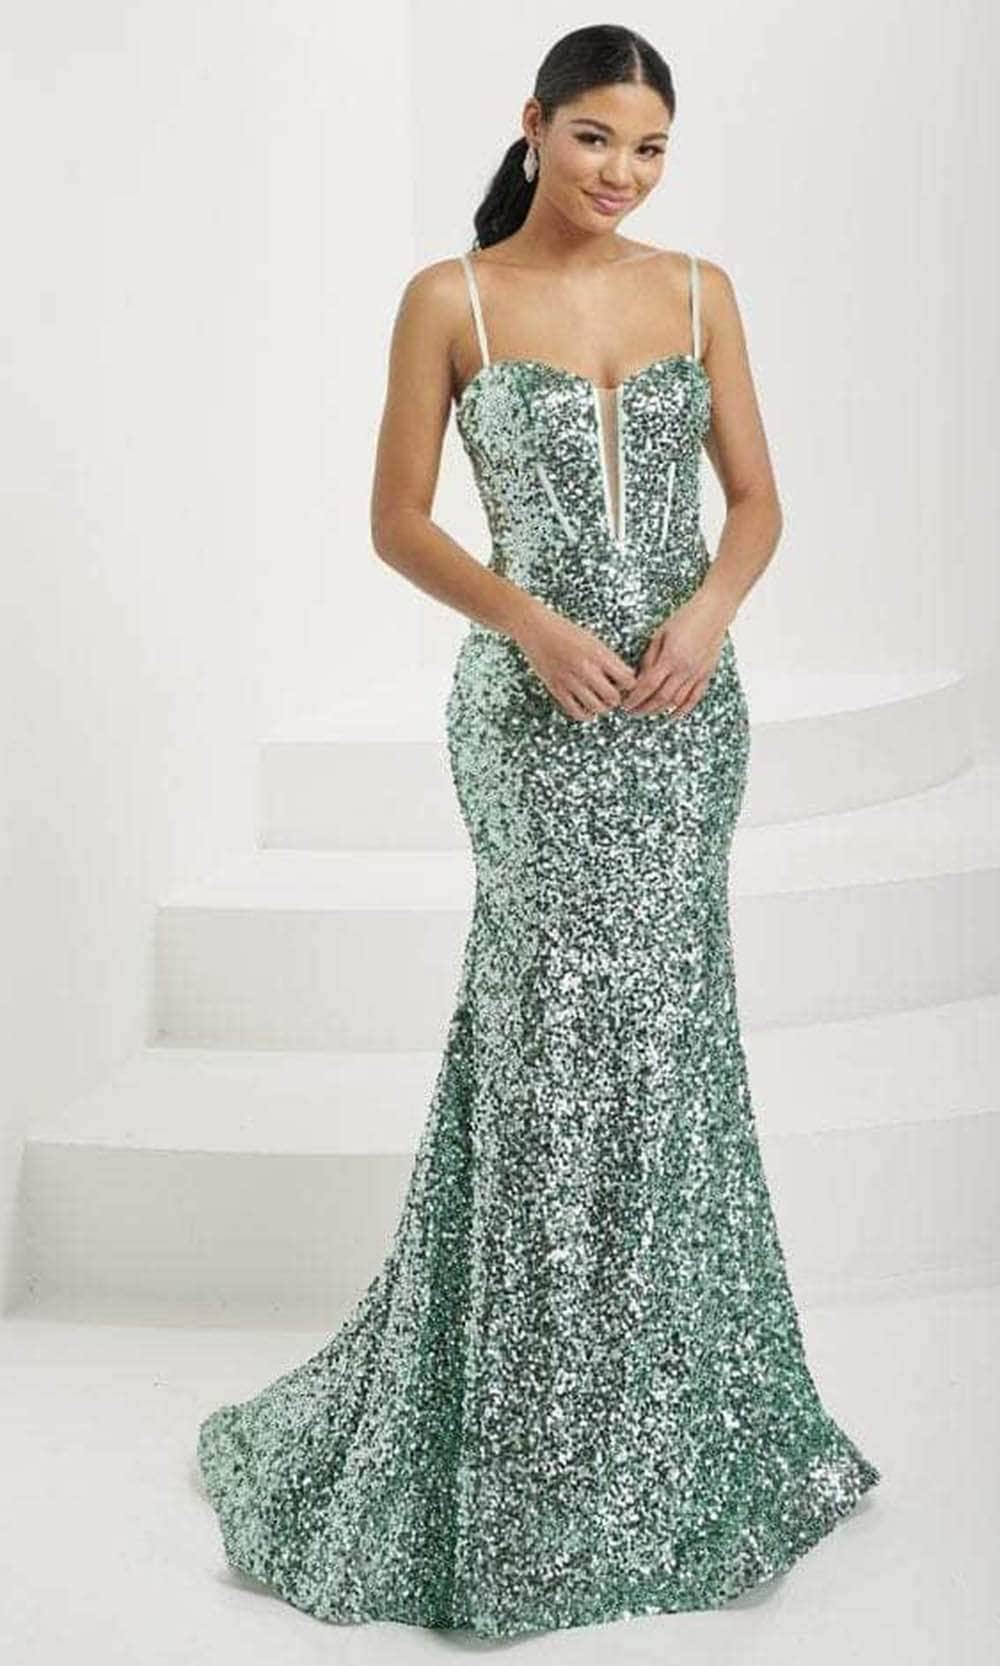 Tiffany Designs 16081 - Plunging Sweetheart Sequin Prom Gown
